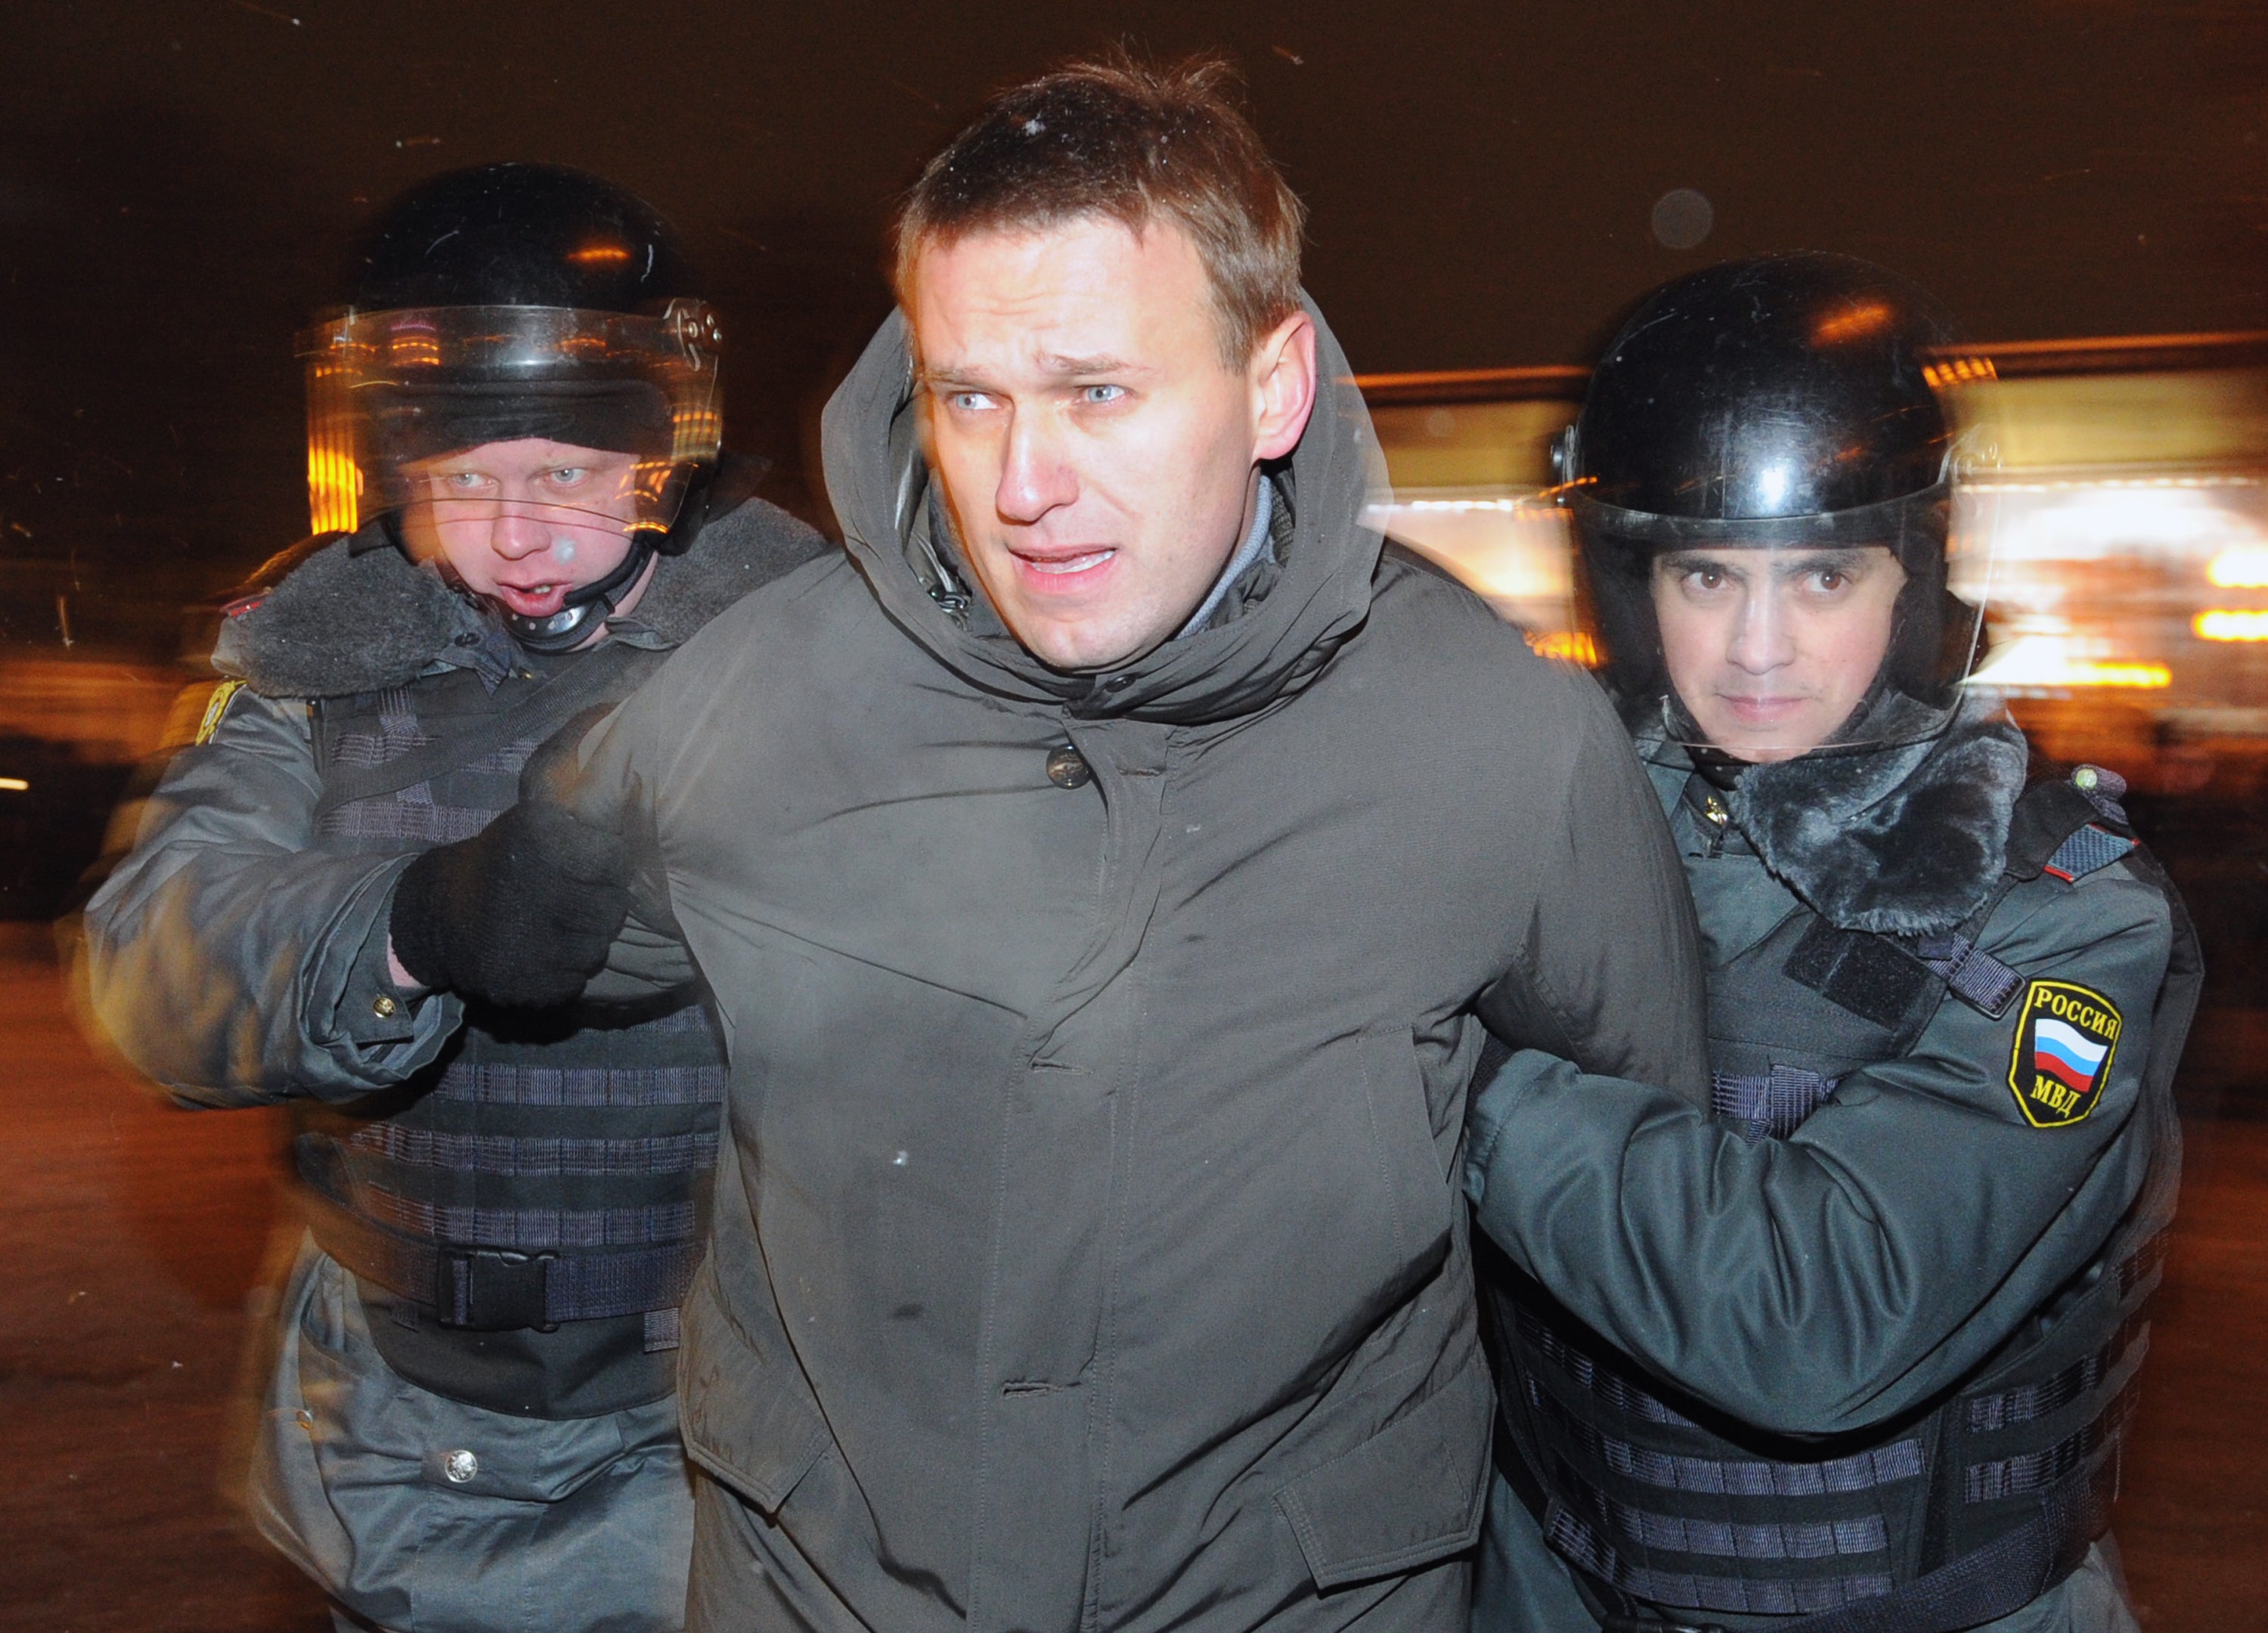 Navalny, pictured here being arrested, was an outspoken critic of Vladimir Putin